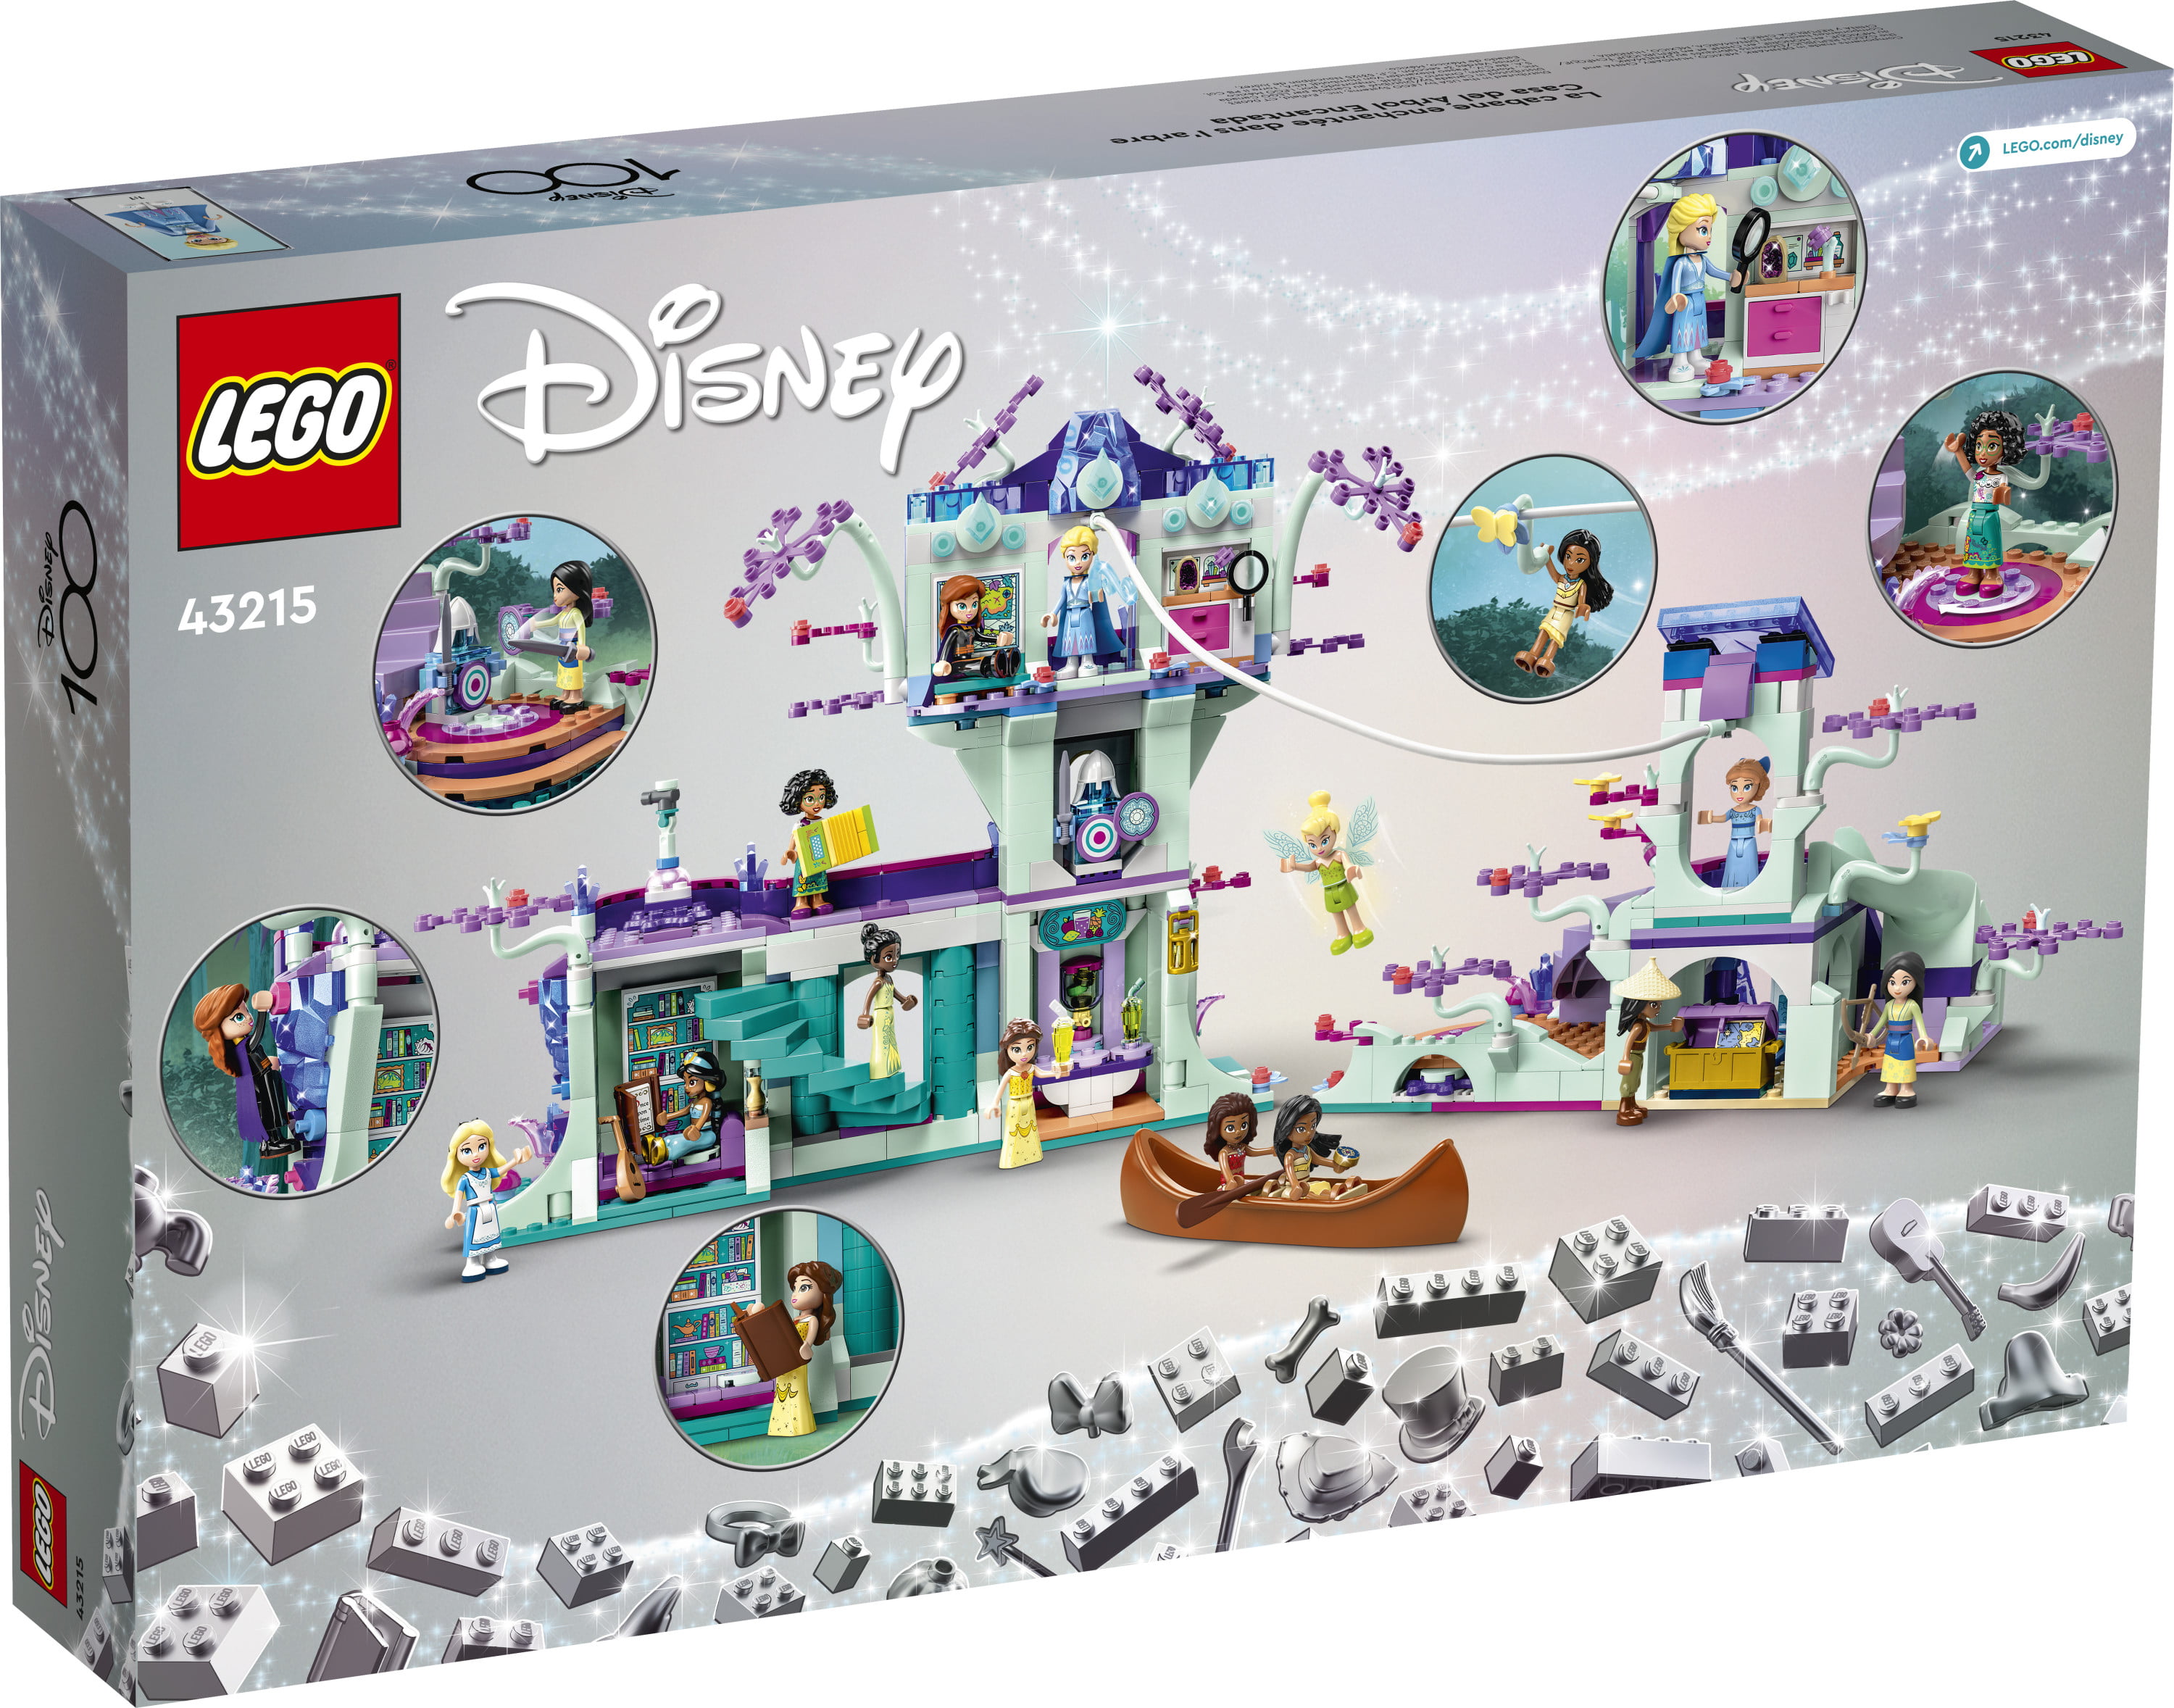 Walmart in-store YMMV lego clearance including 43215 Enchanted treehouse $160 set for $65 and more Miecraft, Mario, Friends, etc